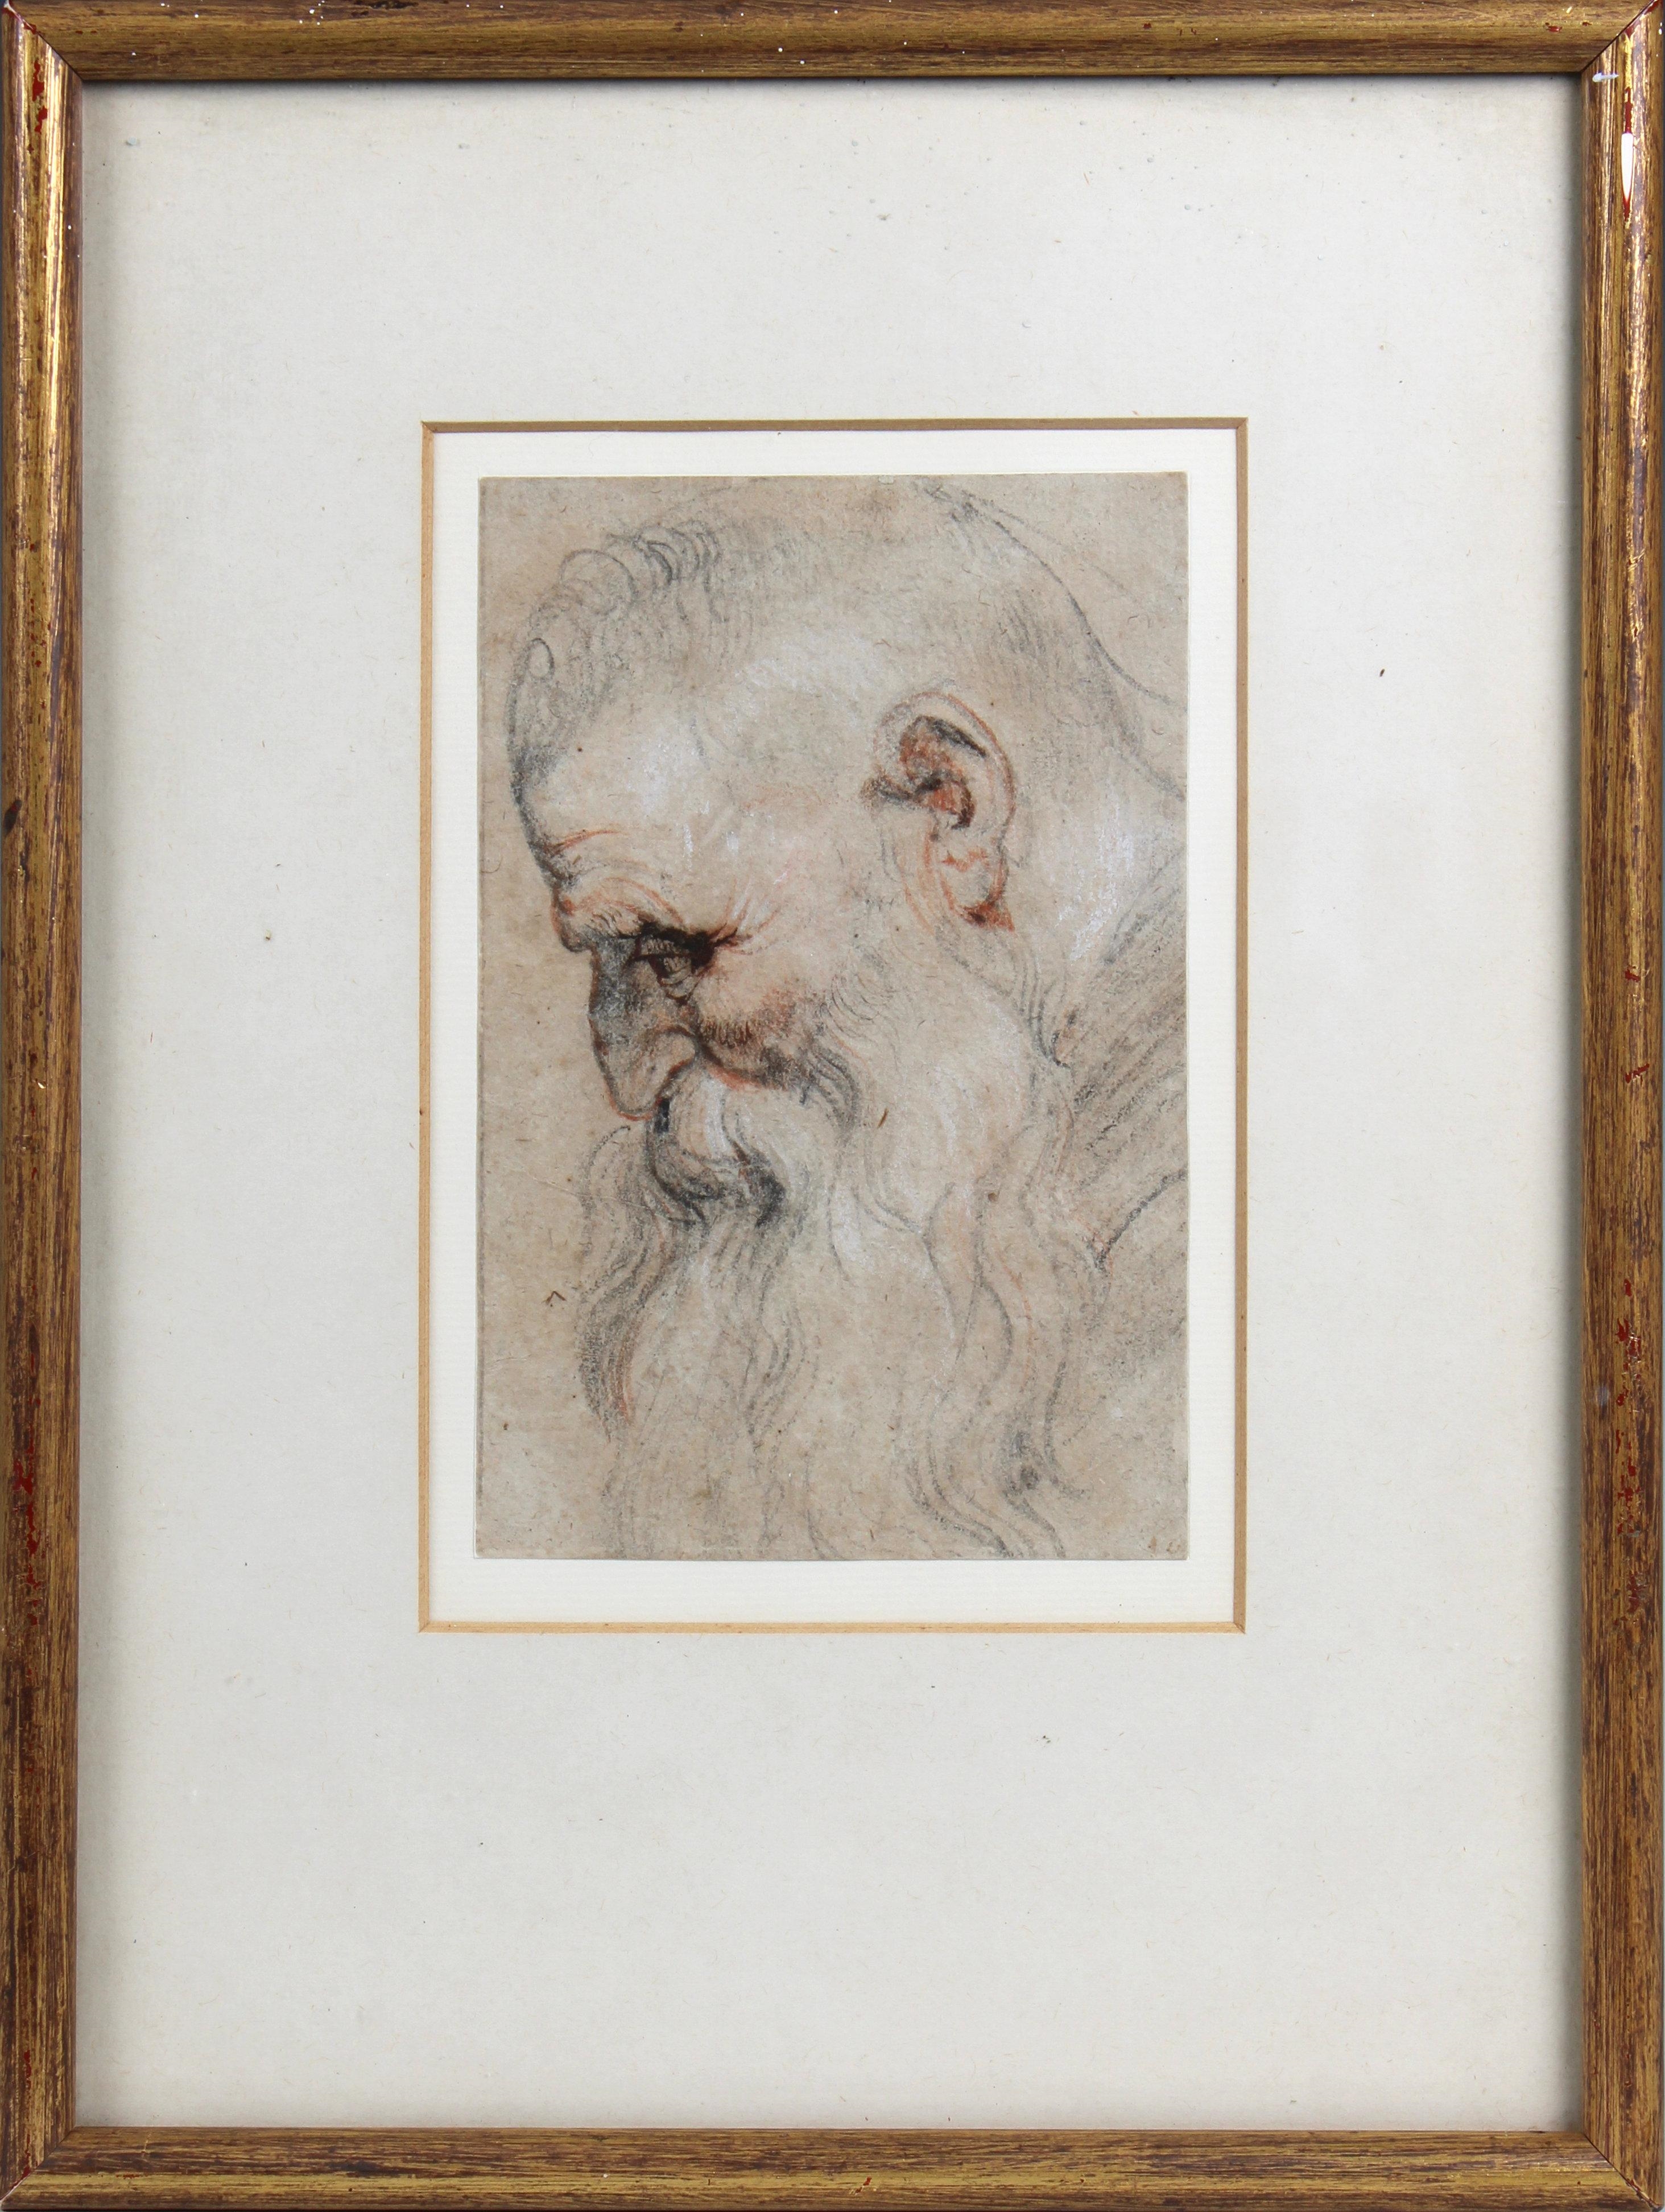 Artwork by Peter Paul Rubens, Four drawings of heads of bearded men, Made of sanguine and black chalk on laid paper